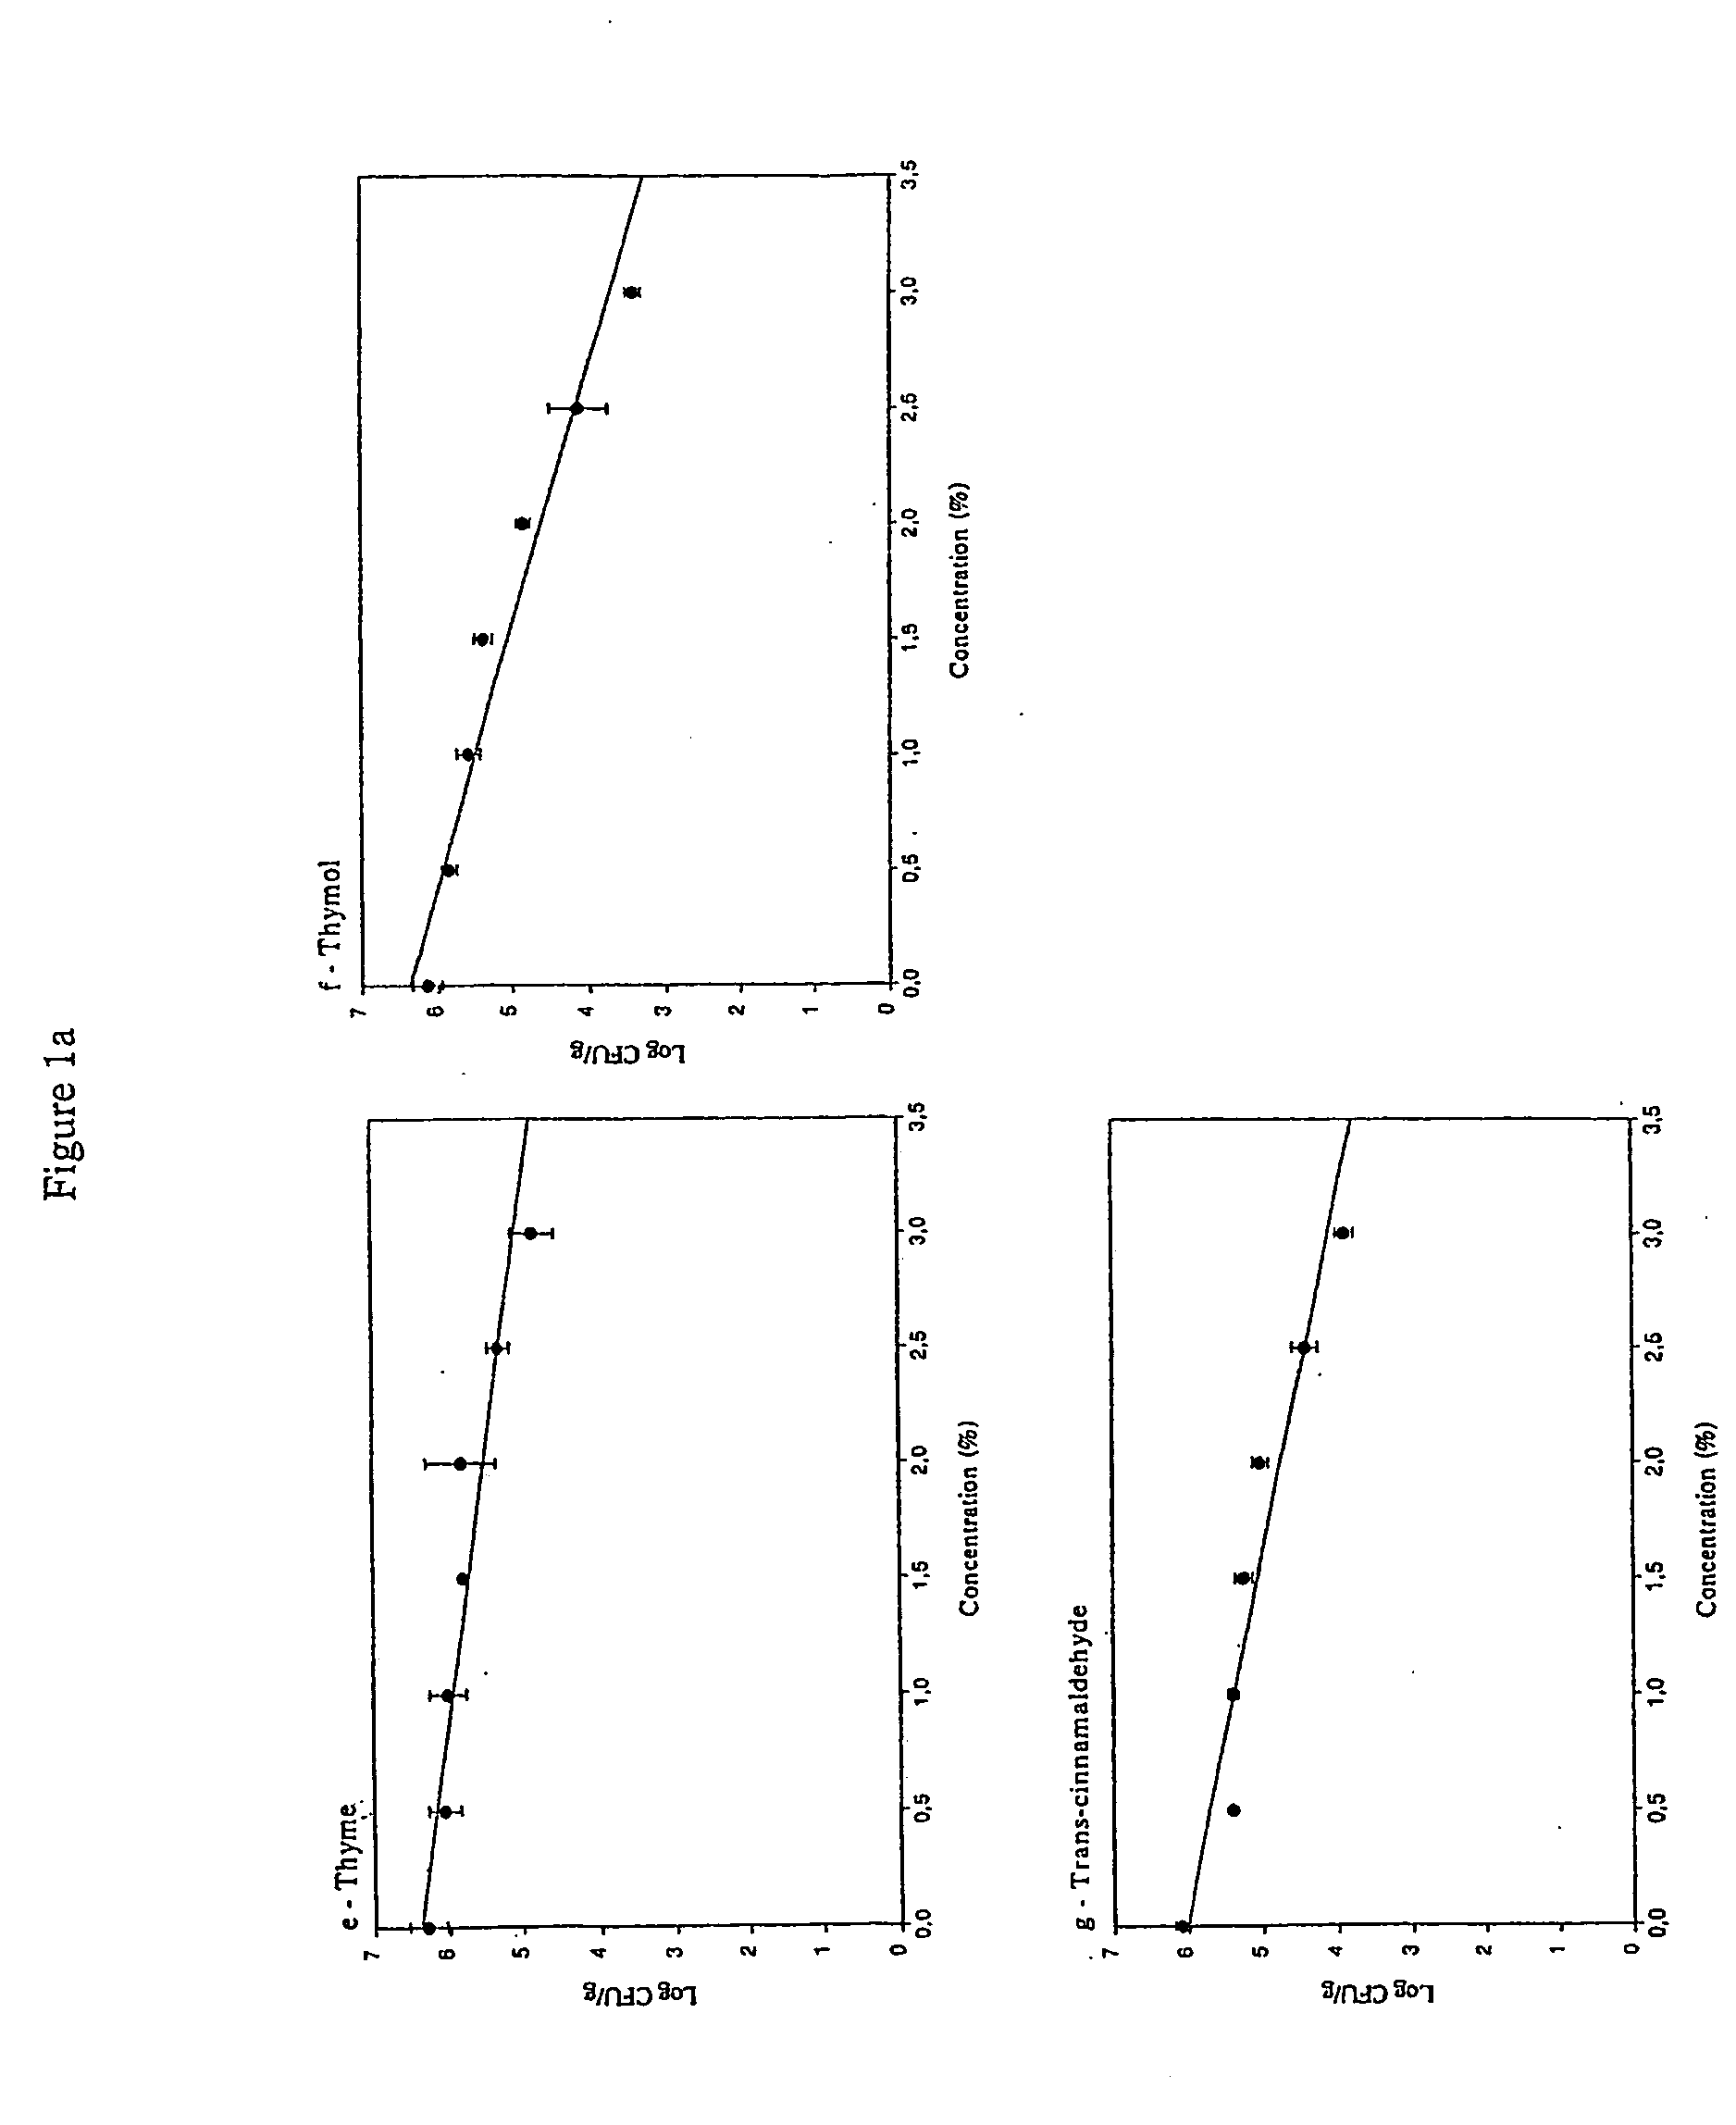 Formulations of compounds derived from natural sources and their use with irradiation for food preservation